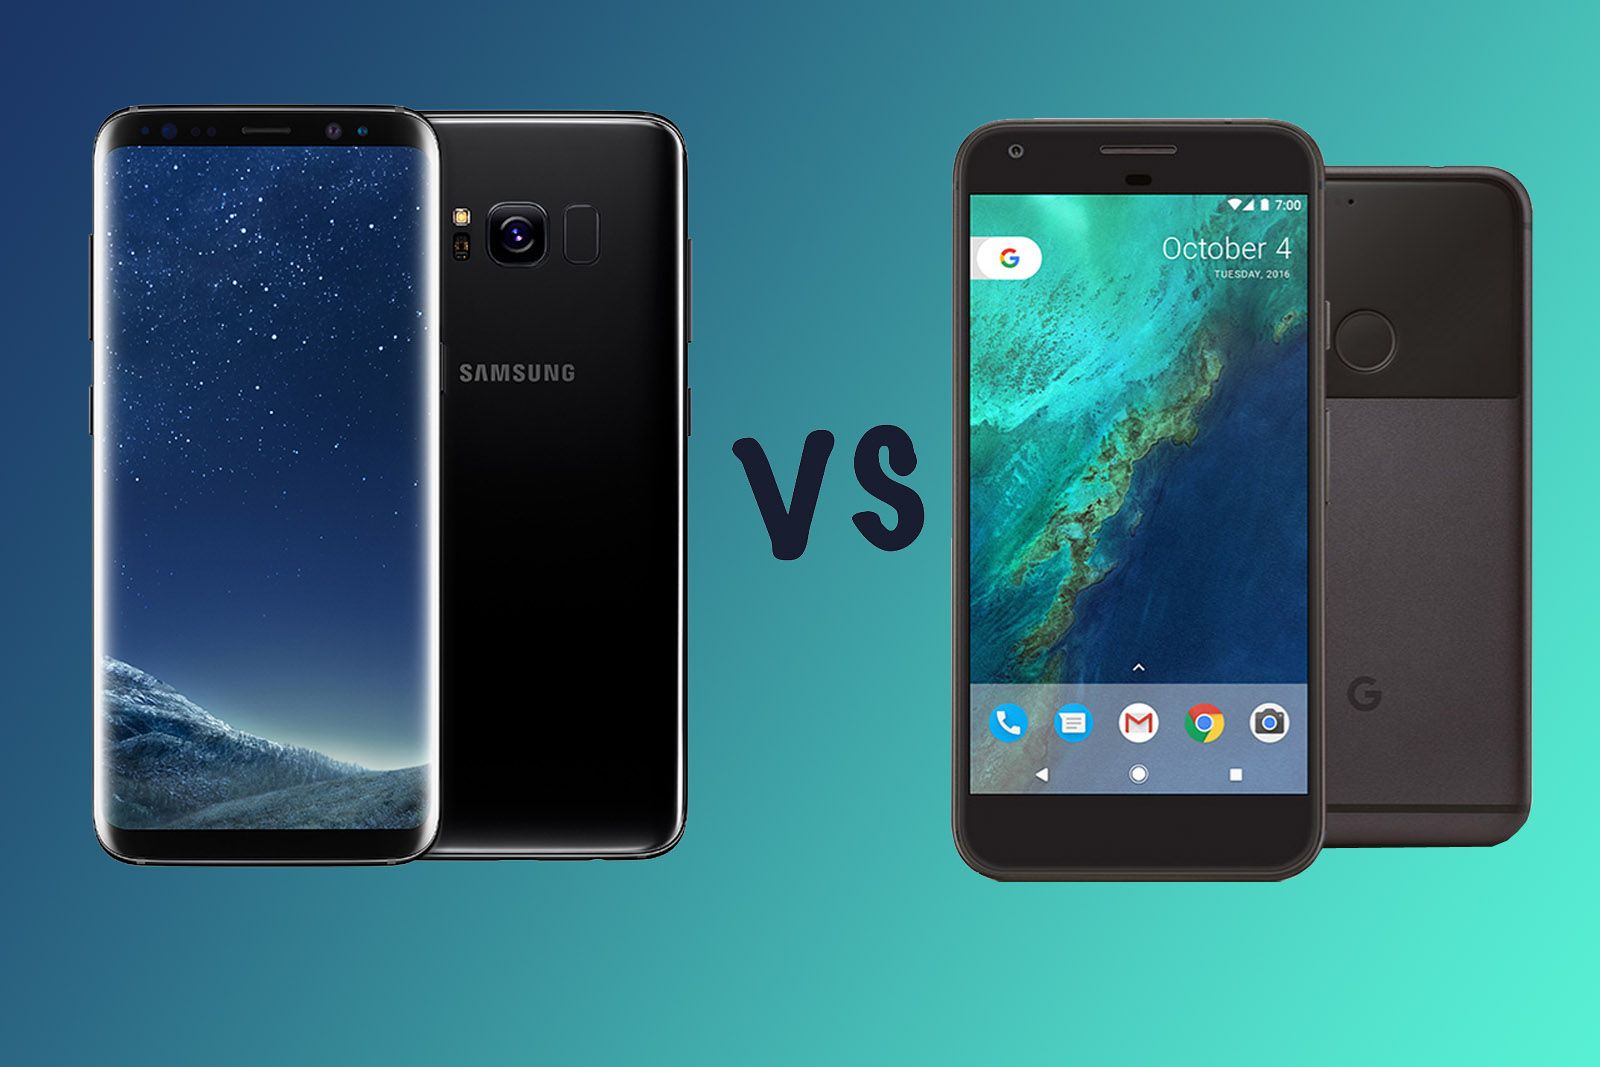 samsung galaxy s8 vs s8 plus vs pixel vs pixel xl what s the difference image 1